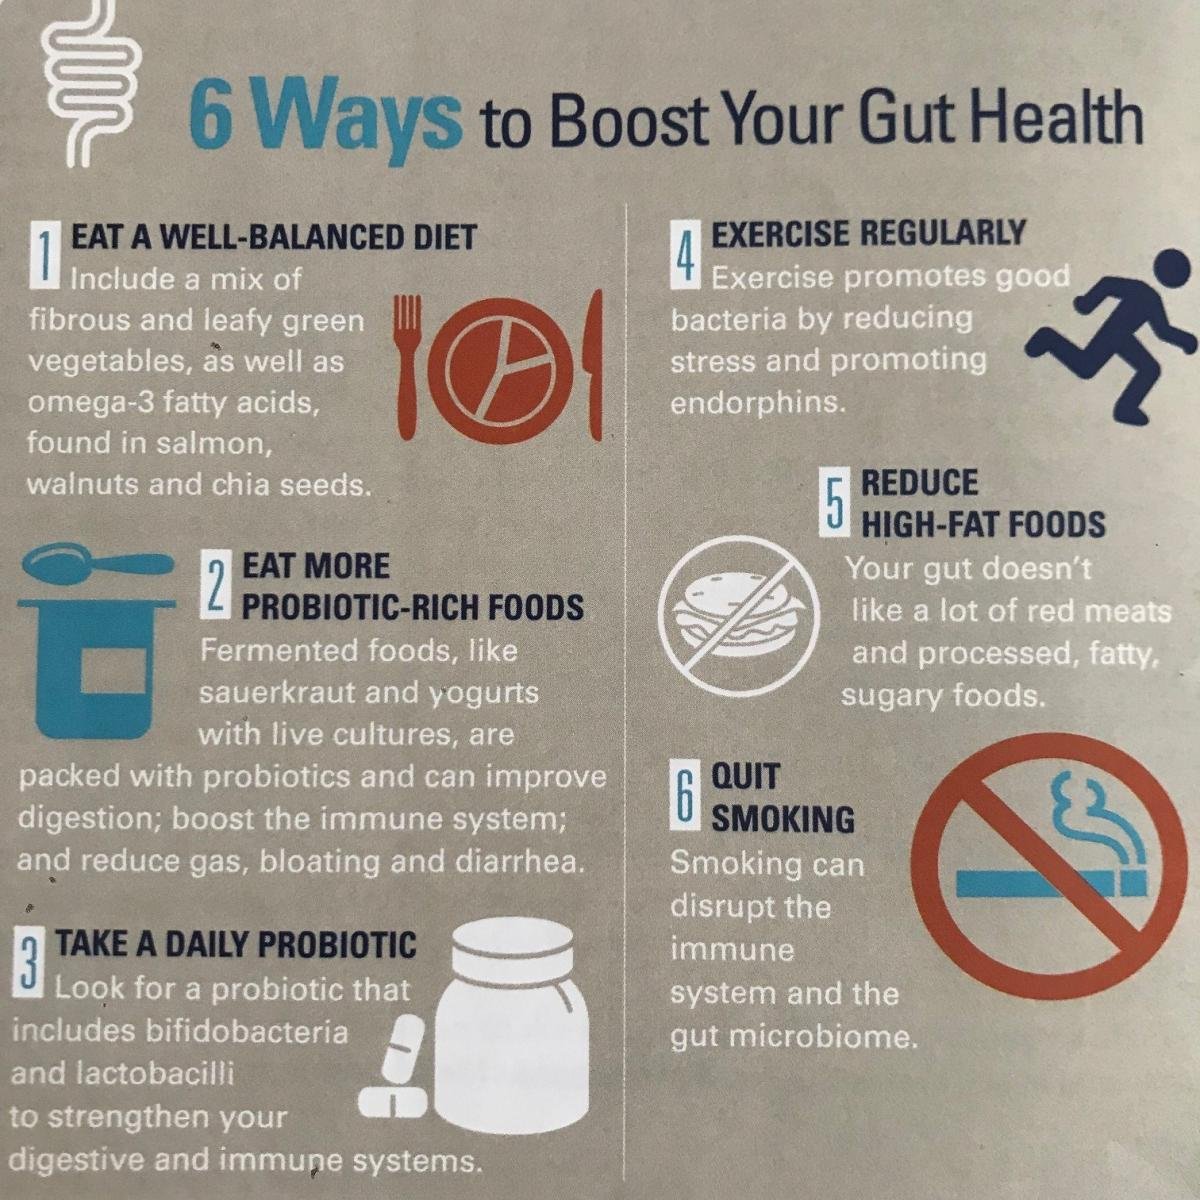 Ways to Boost your Gut Health